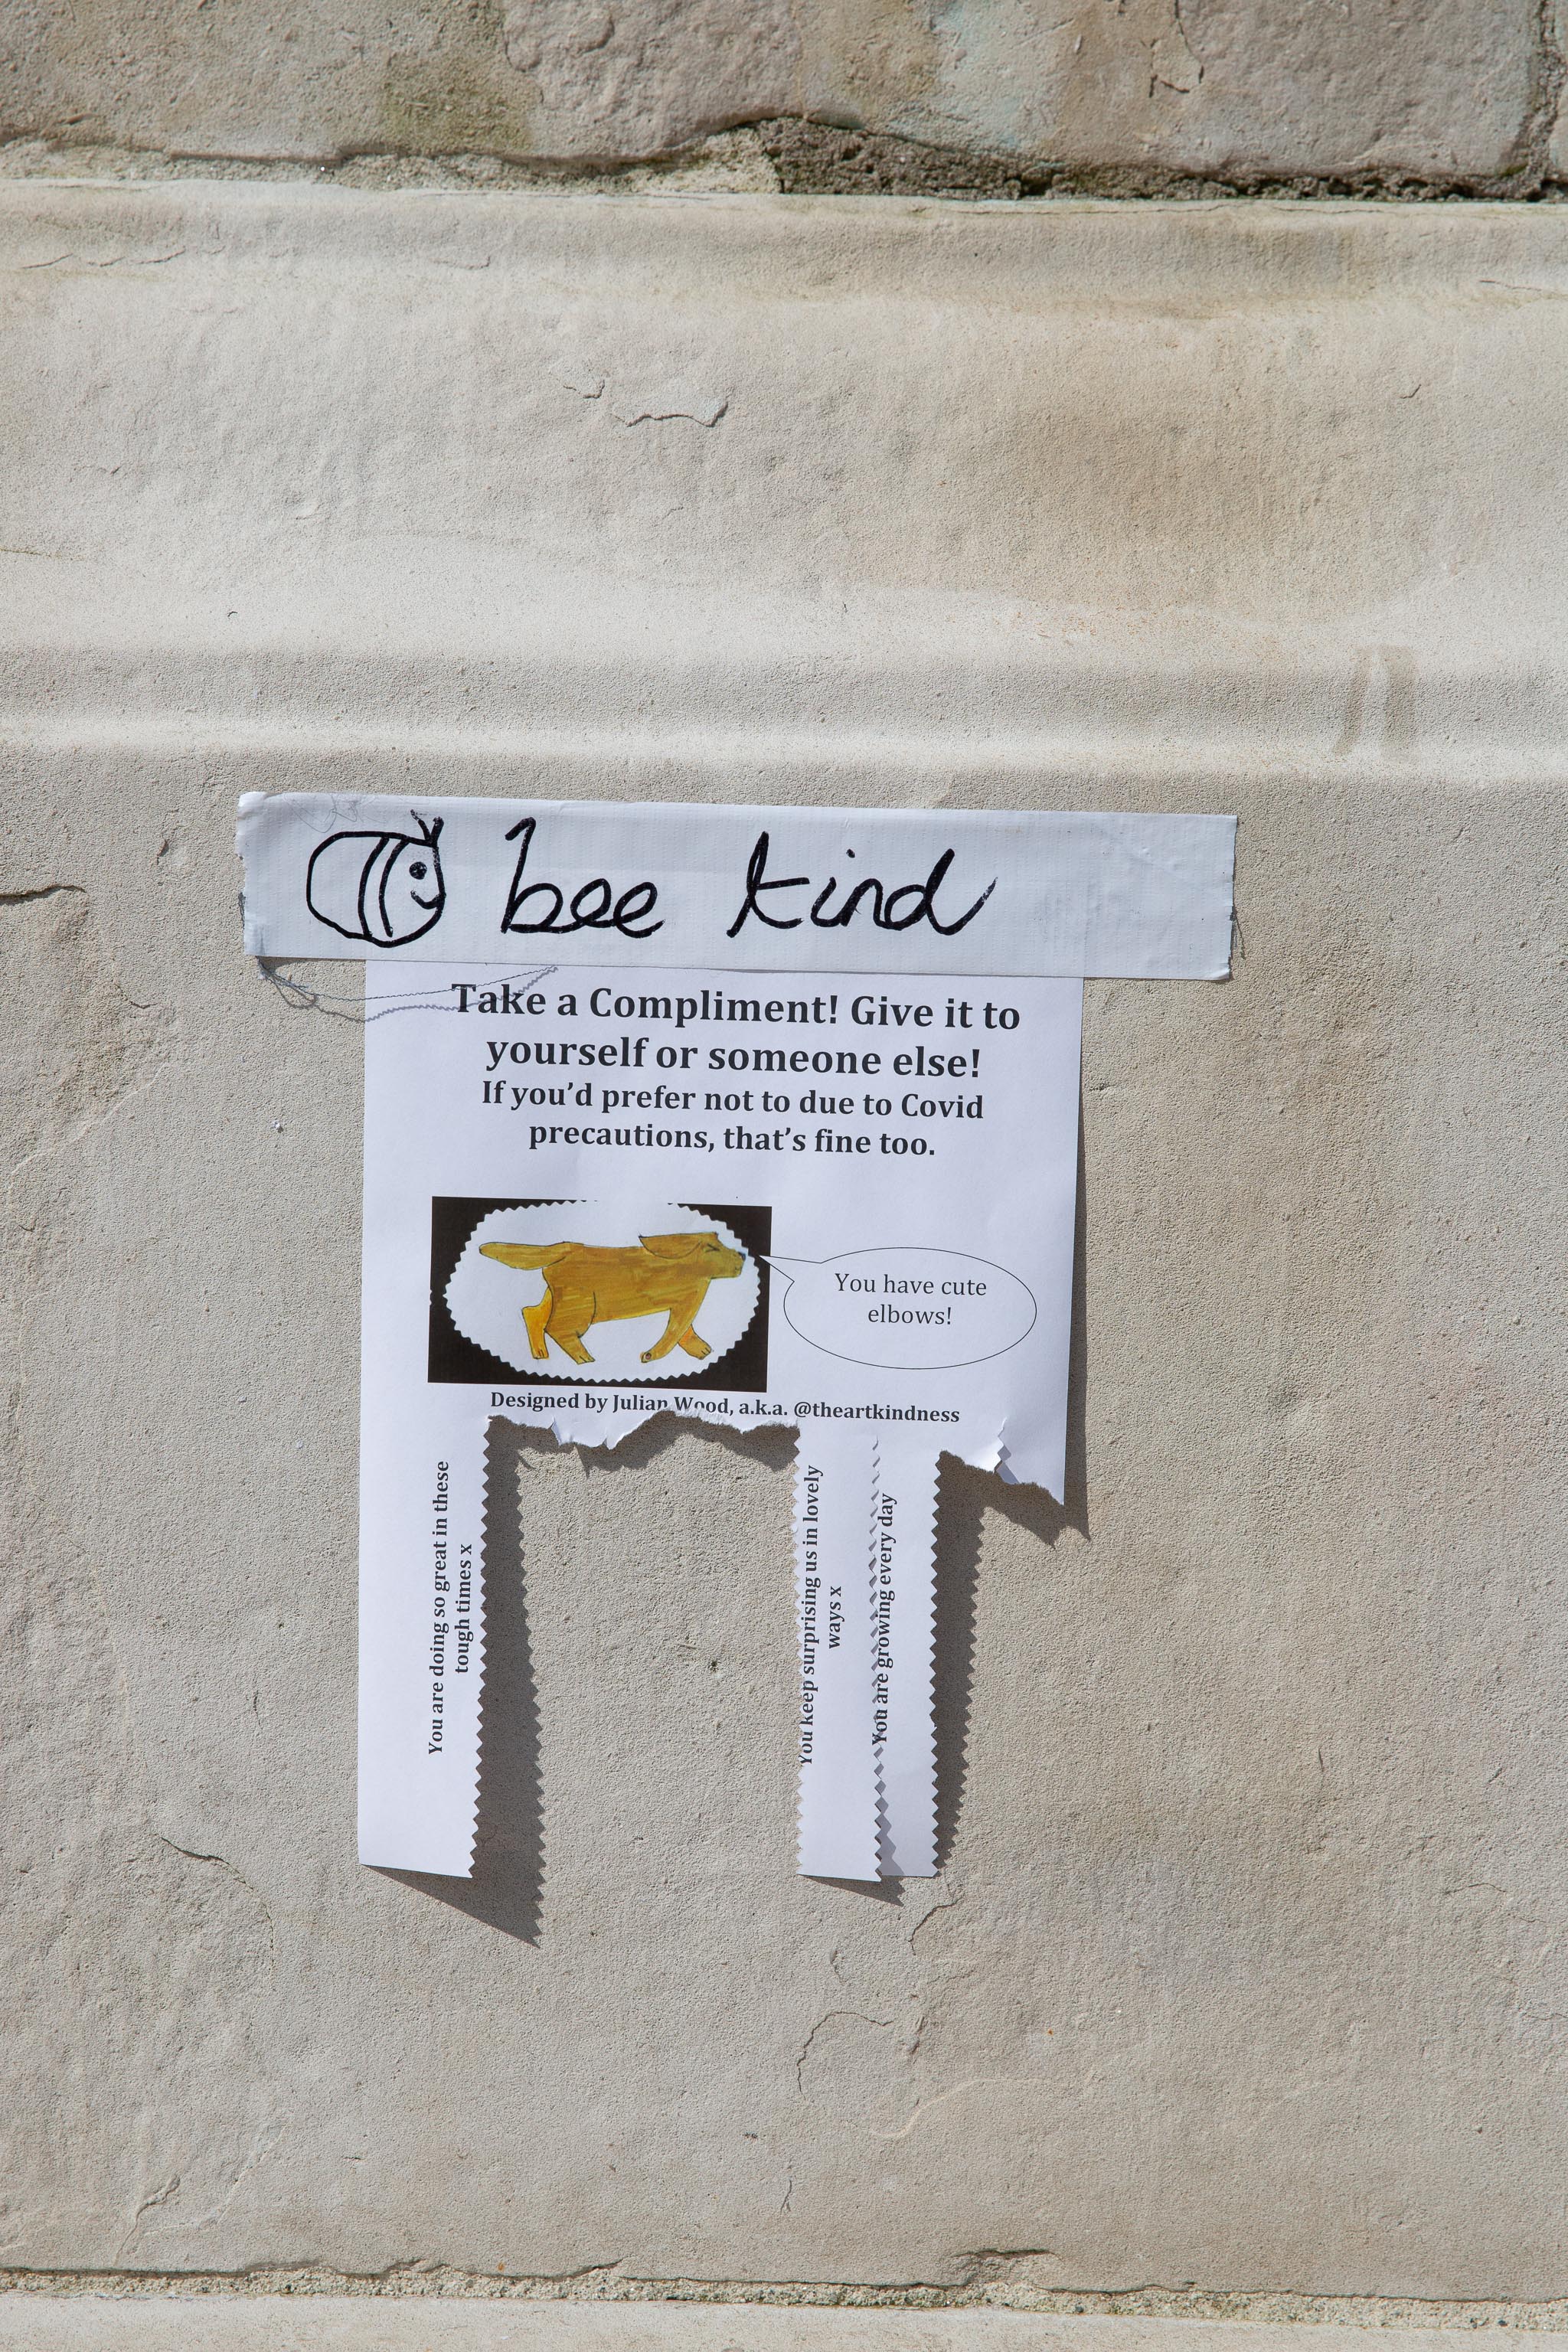 Bee Kind
As with the earlier bee-related fun, part of The Art of Kindness project.
